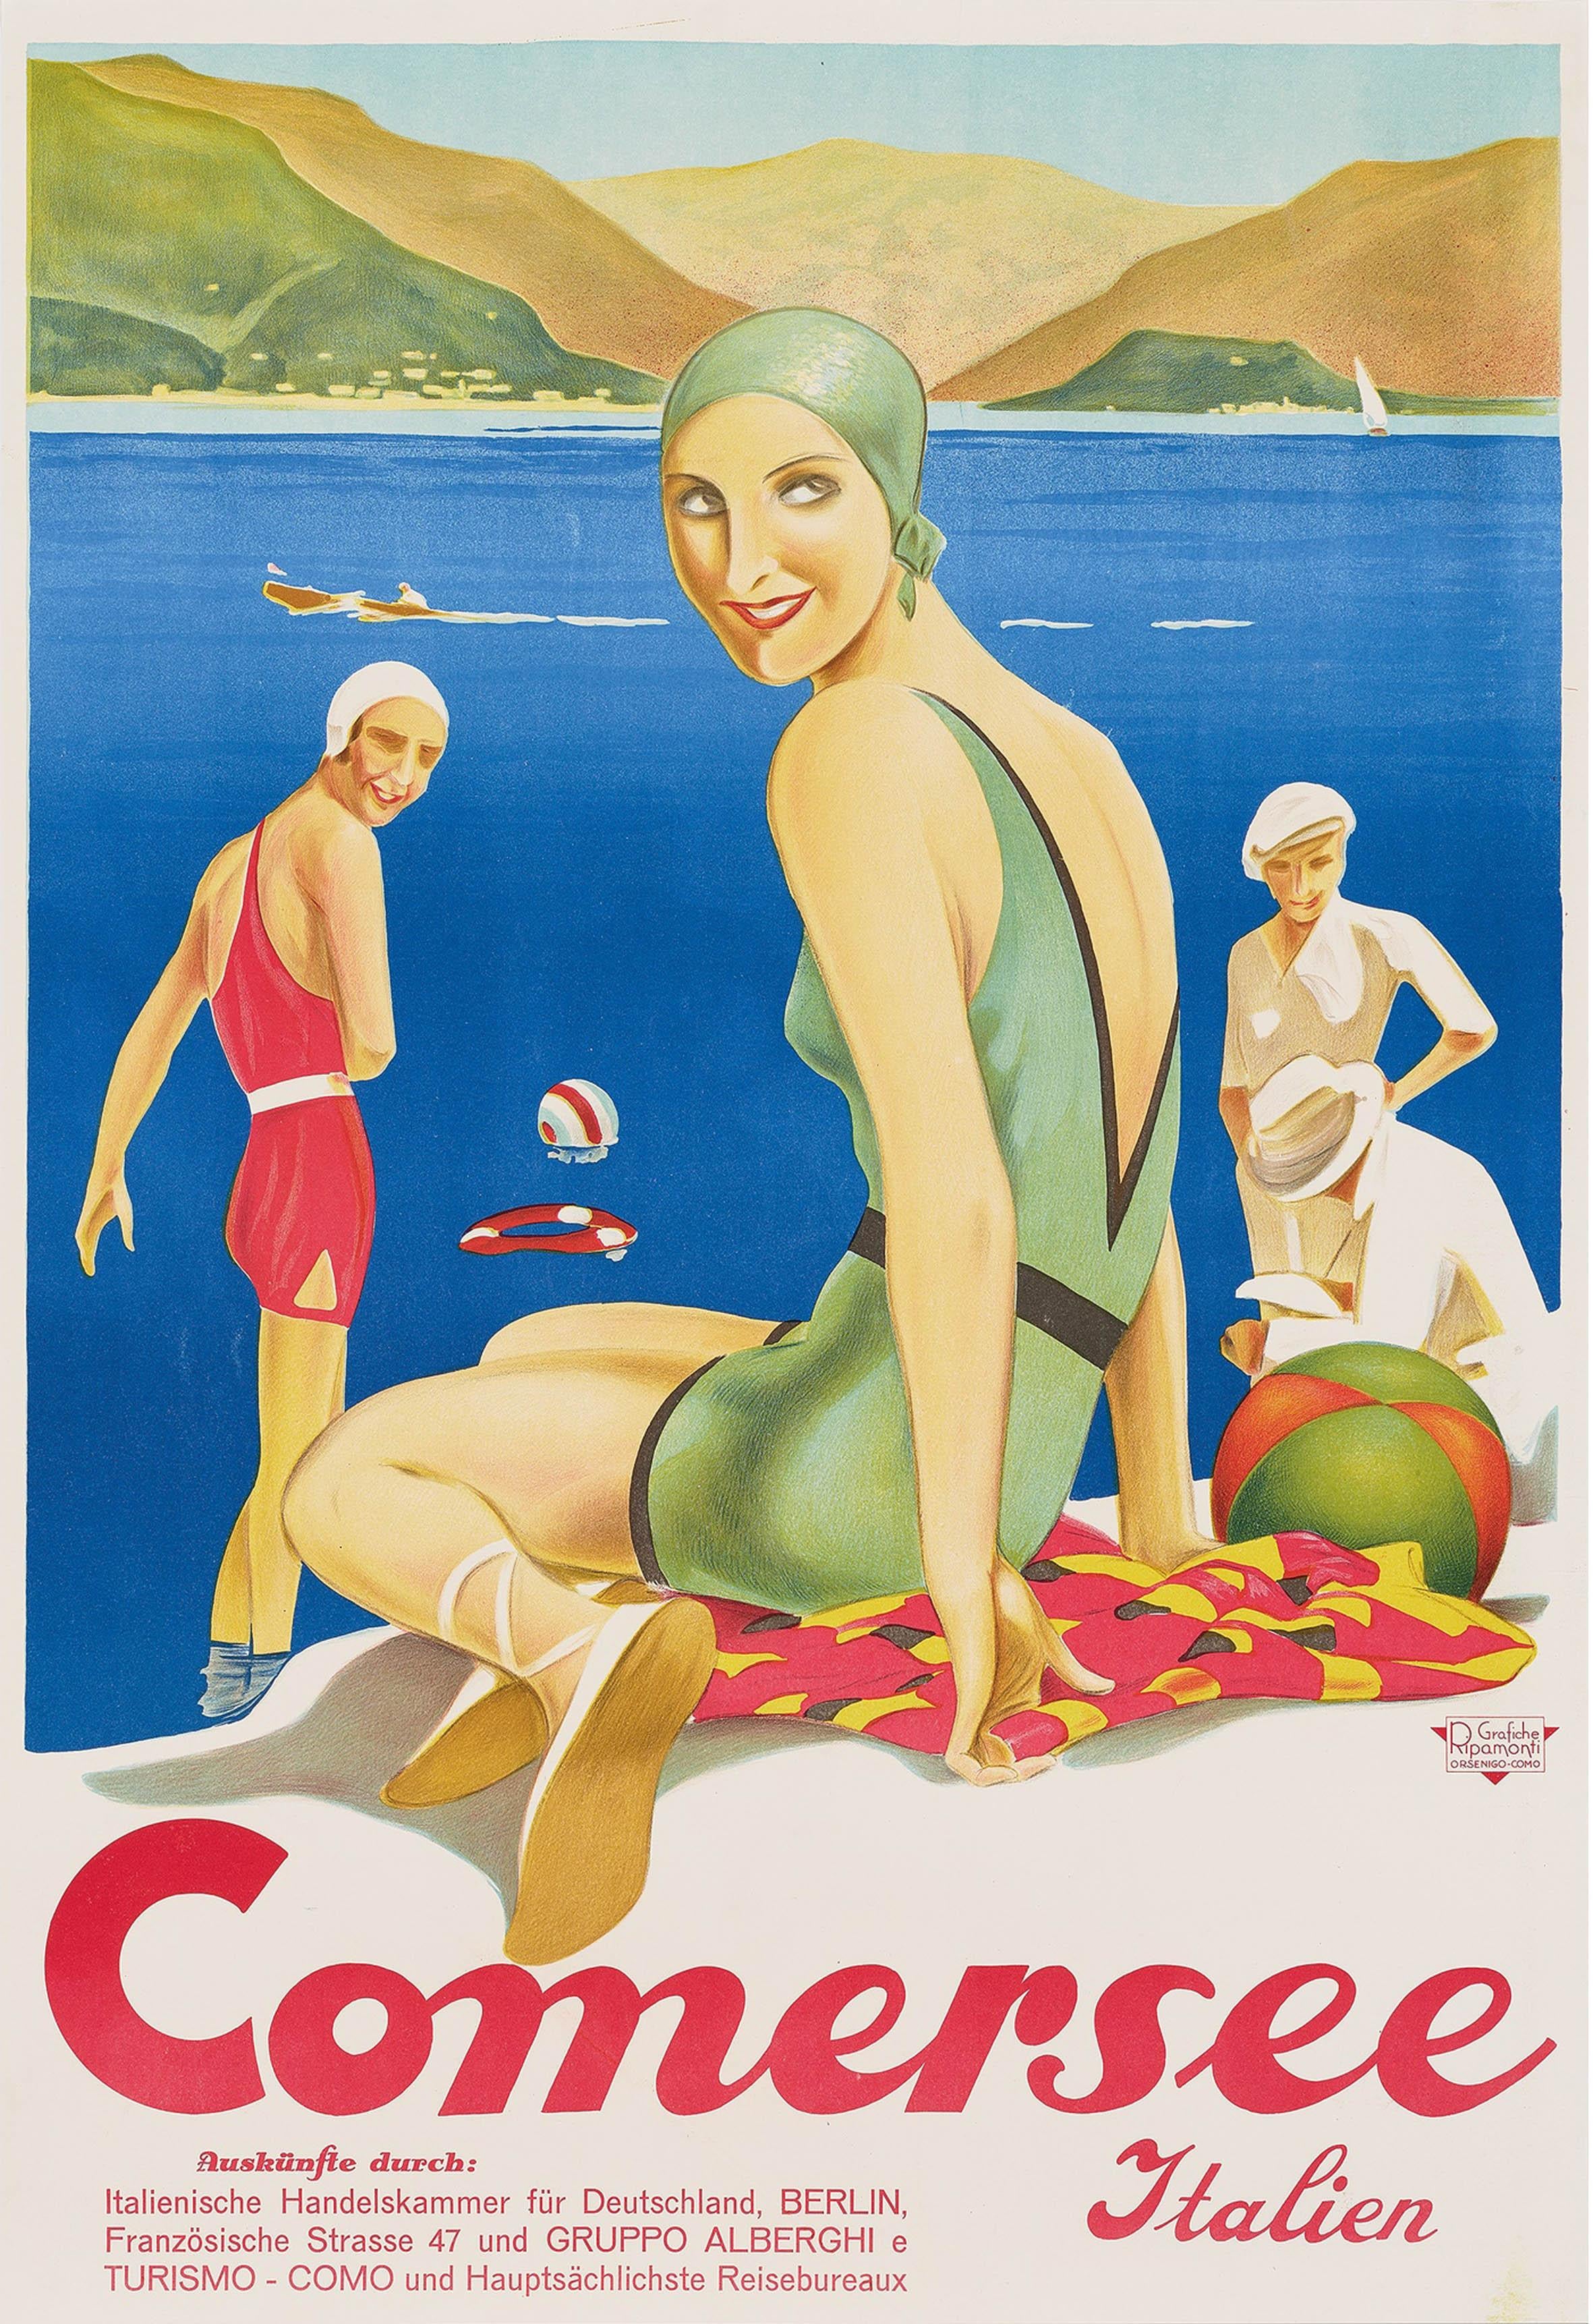 Unknown Print - Original Vintage Travel Poster Lake Como Art Deco Bathers Comersee Italy Italien